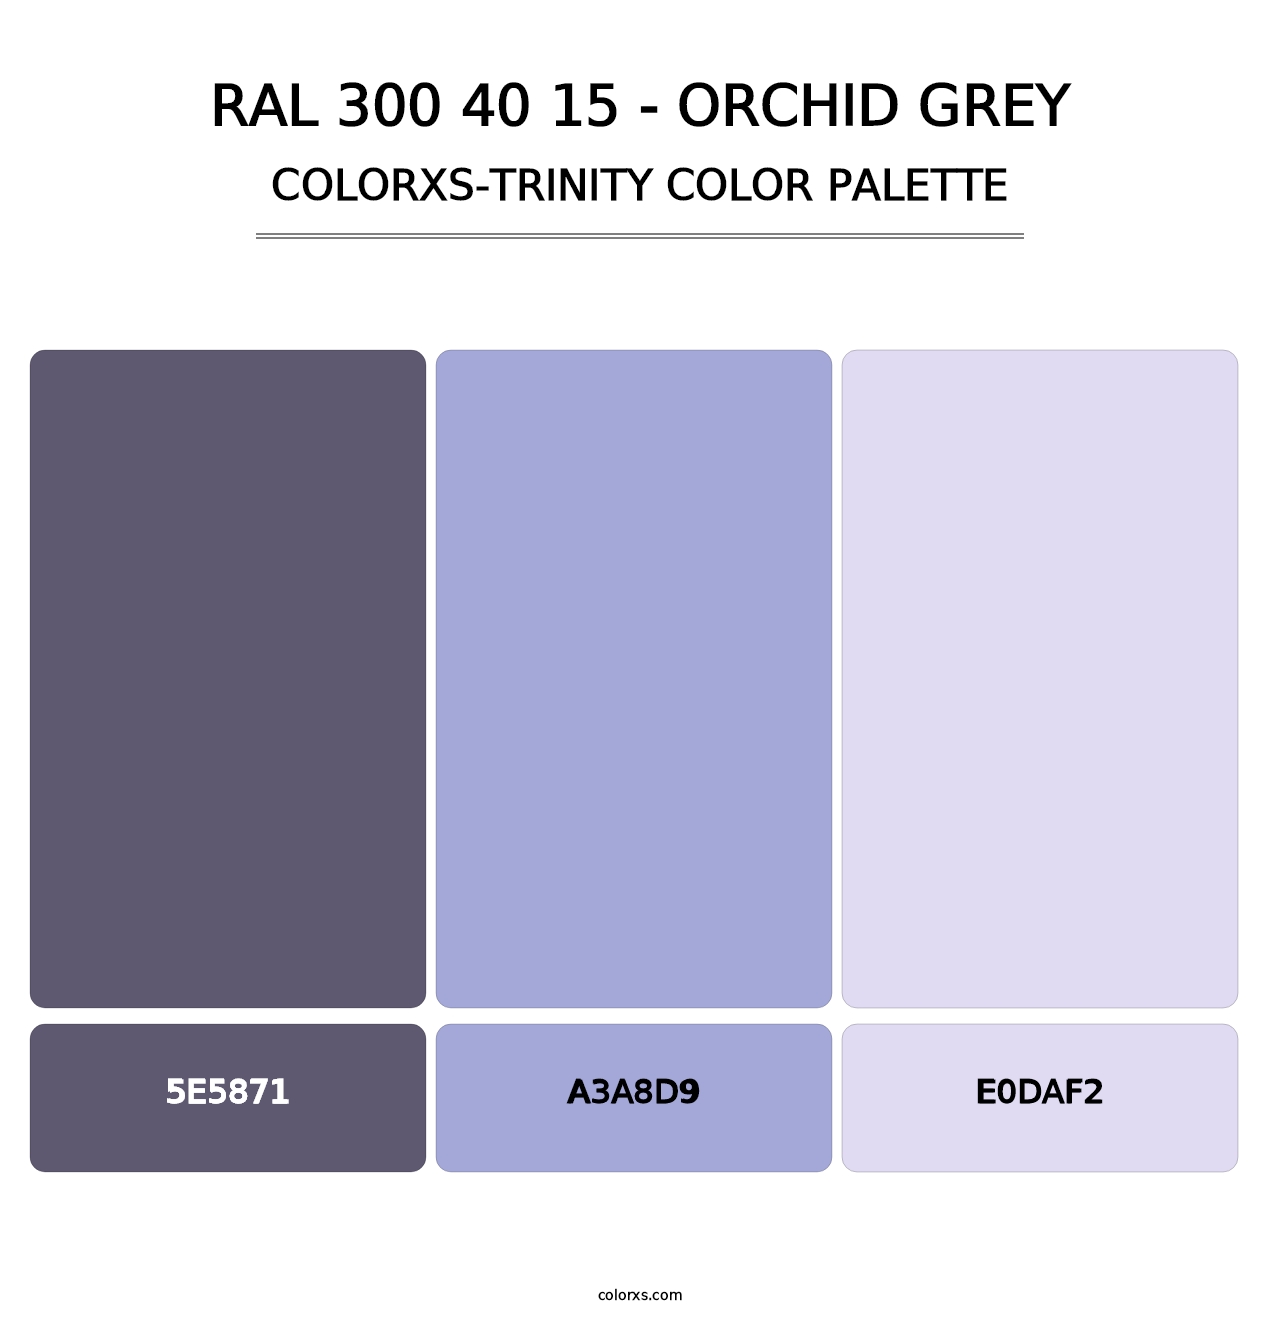 RAL 300 40 15 - Orchid Grey - Colorxs Trinity Palette